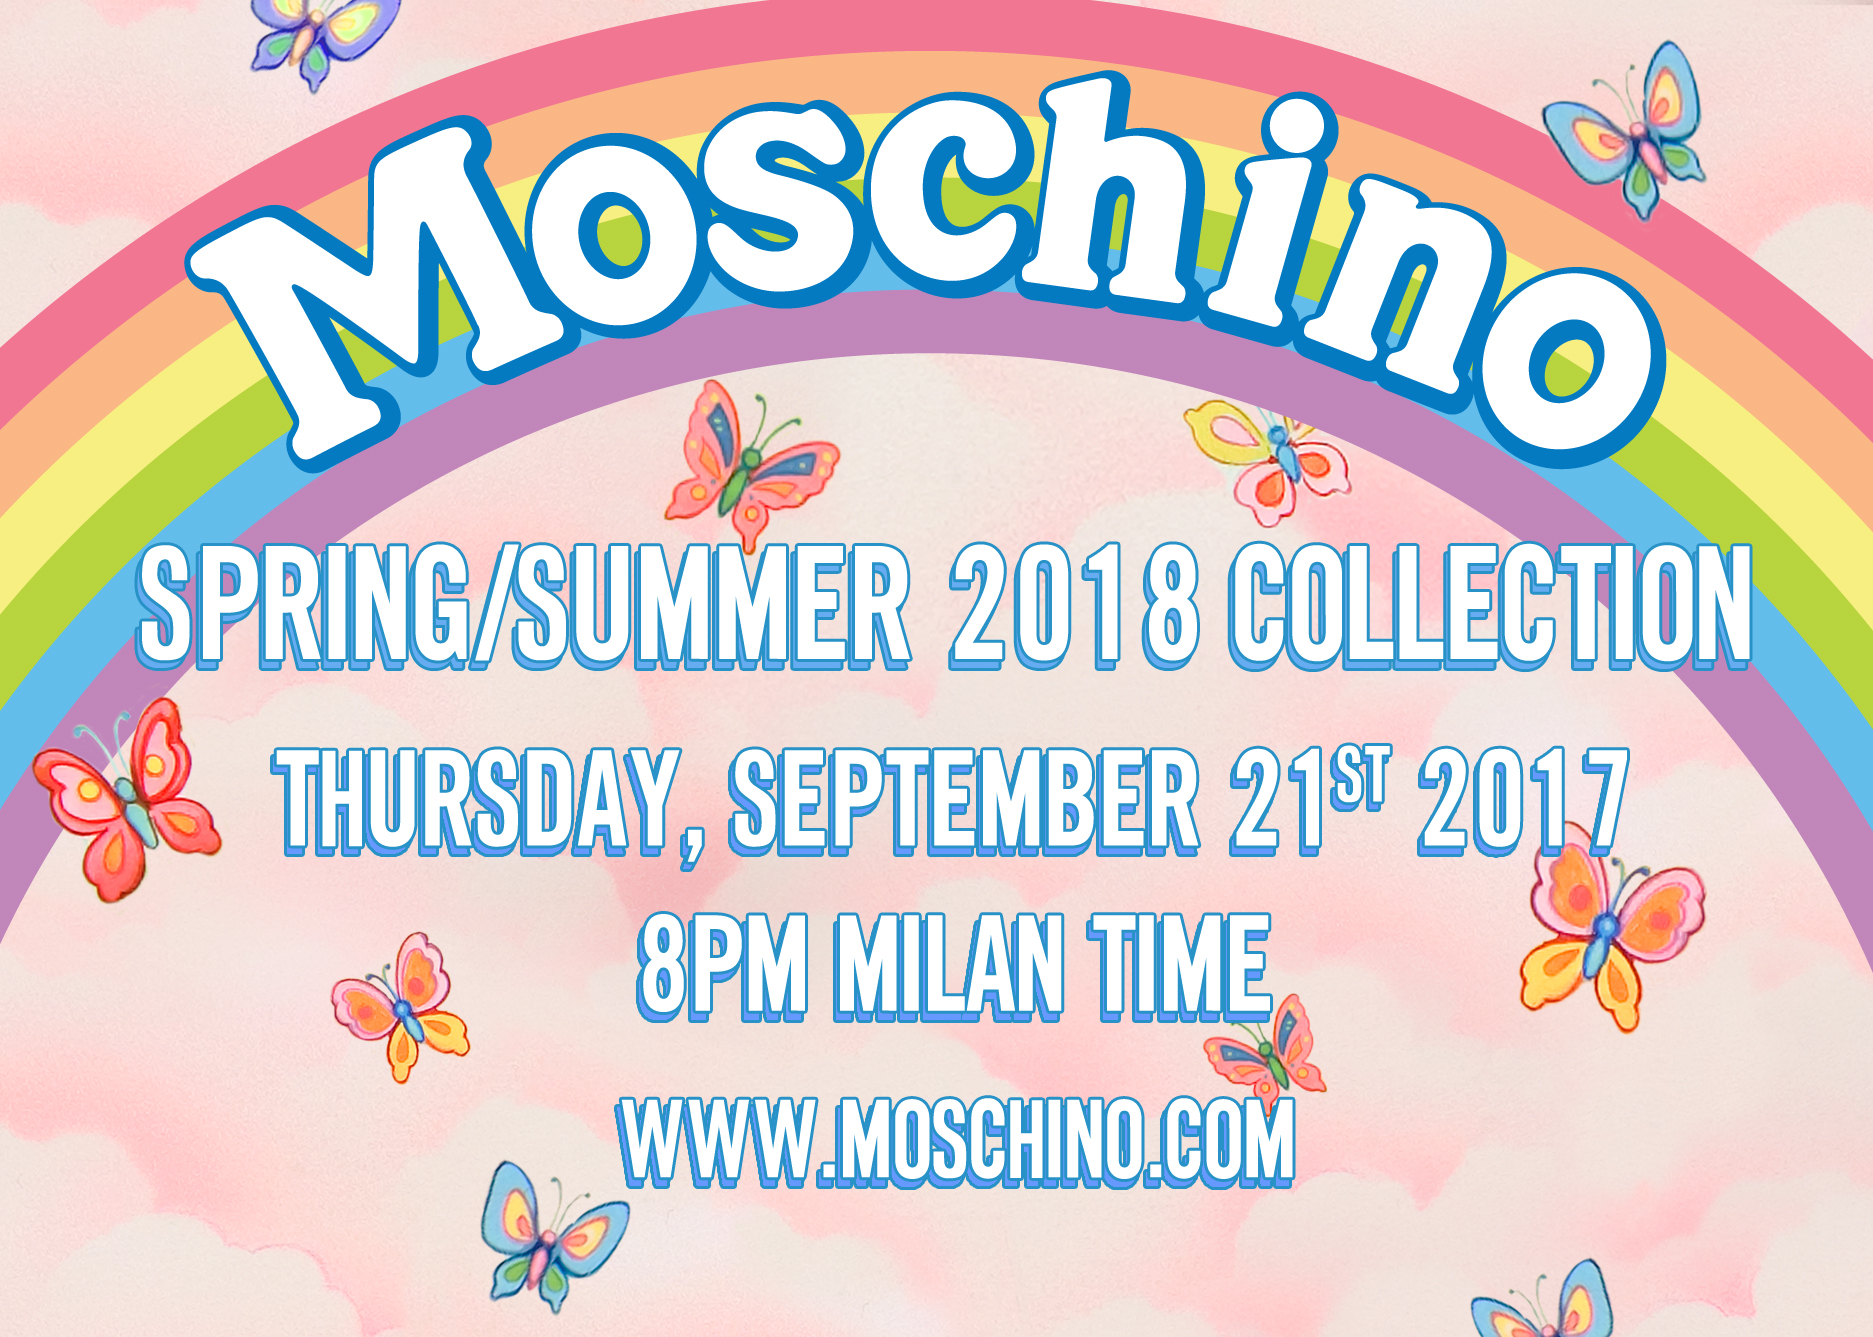 Watch Moschino's SS18 Show LIVE from Milan Fashion Week HERE TONIGHT!